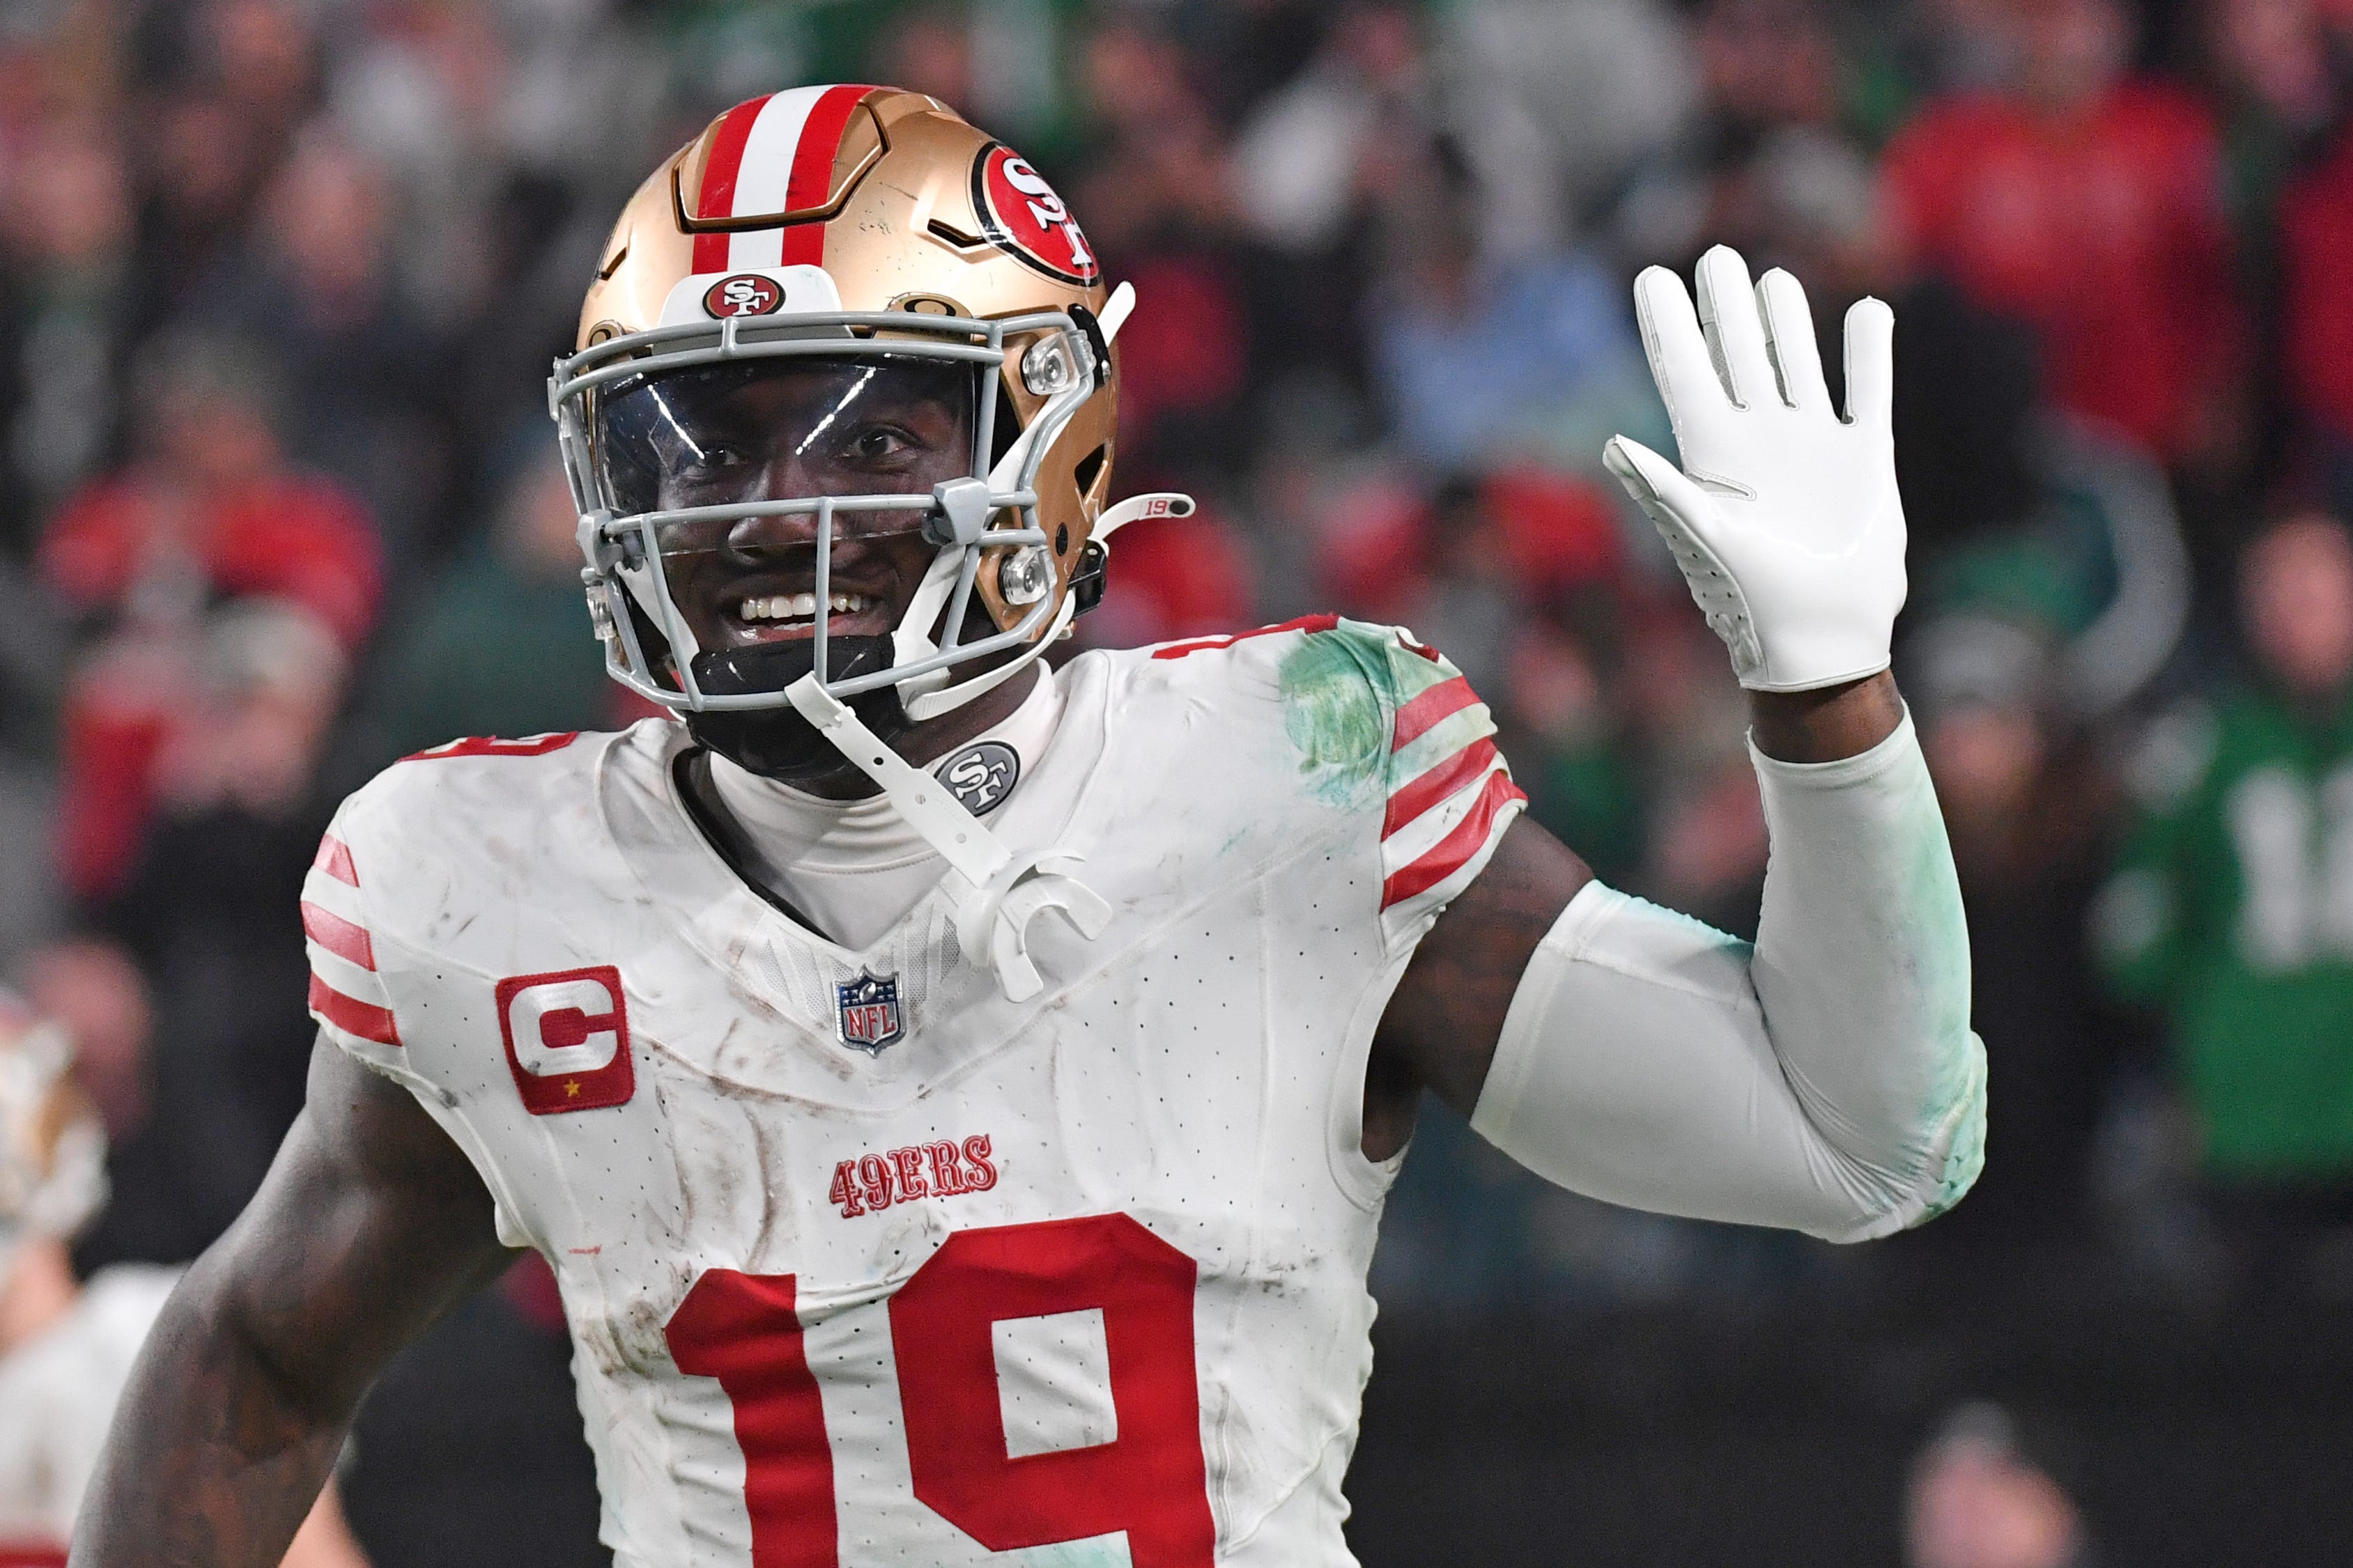 nfc playoff picture: 49ers move into top seed in conference